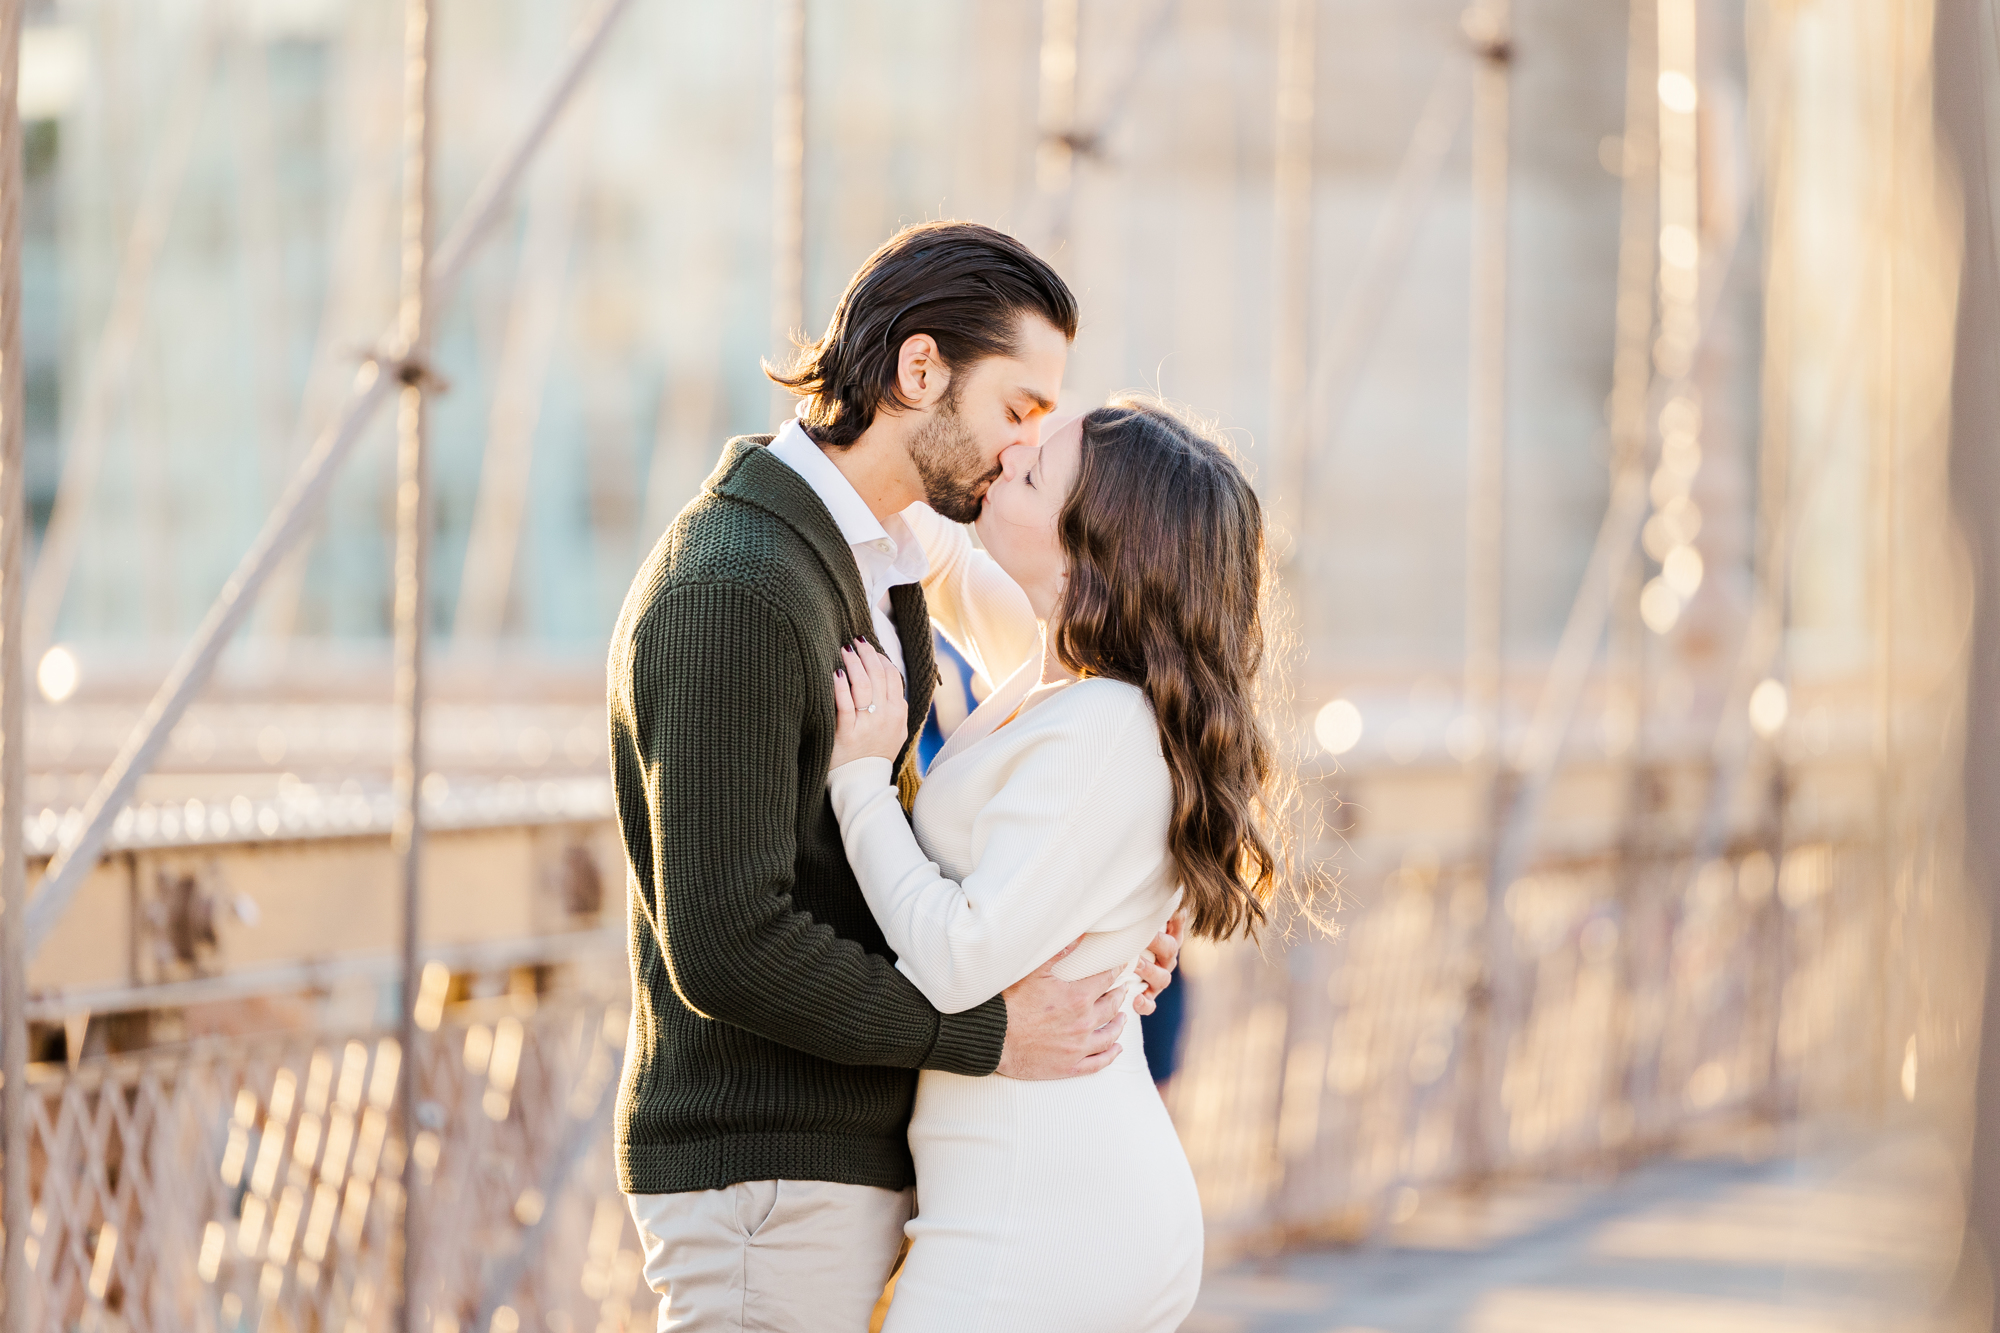 Cheerful Brooklyn Bridge Park Engagement Pictures